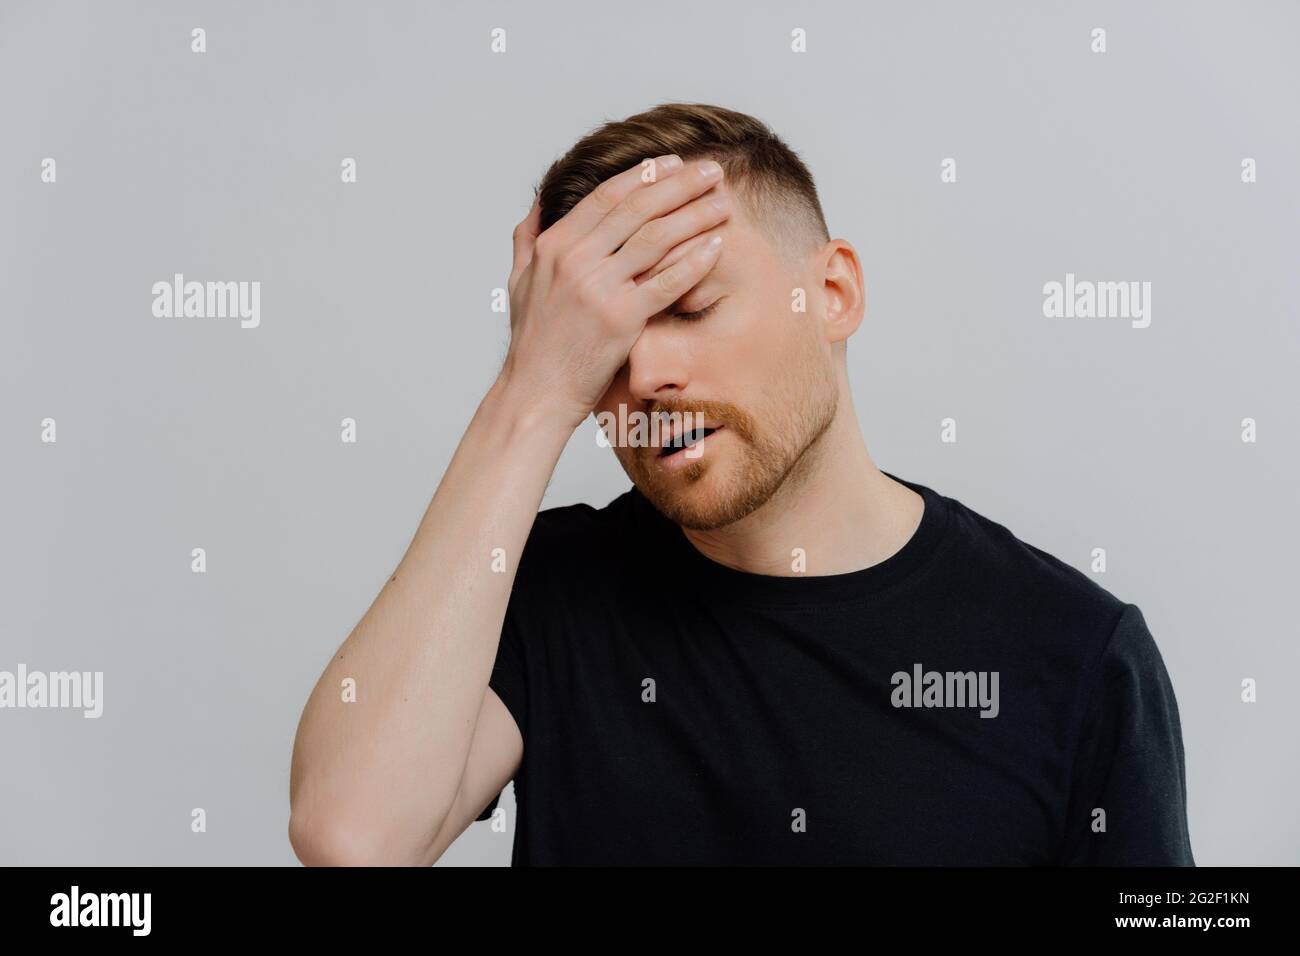 Worried man doing facepalm gesture and keeping eyes closed, concerning about troubles at work Stock Photo